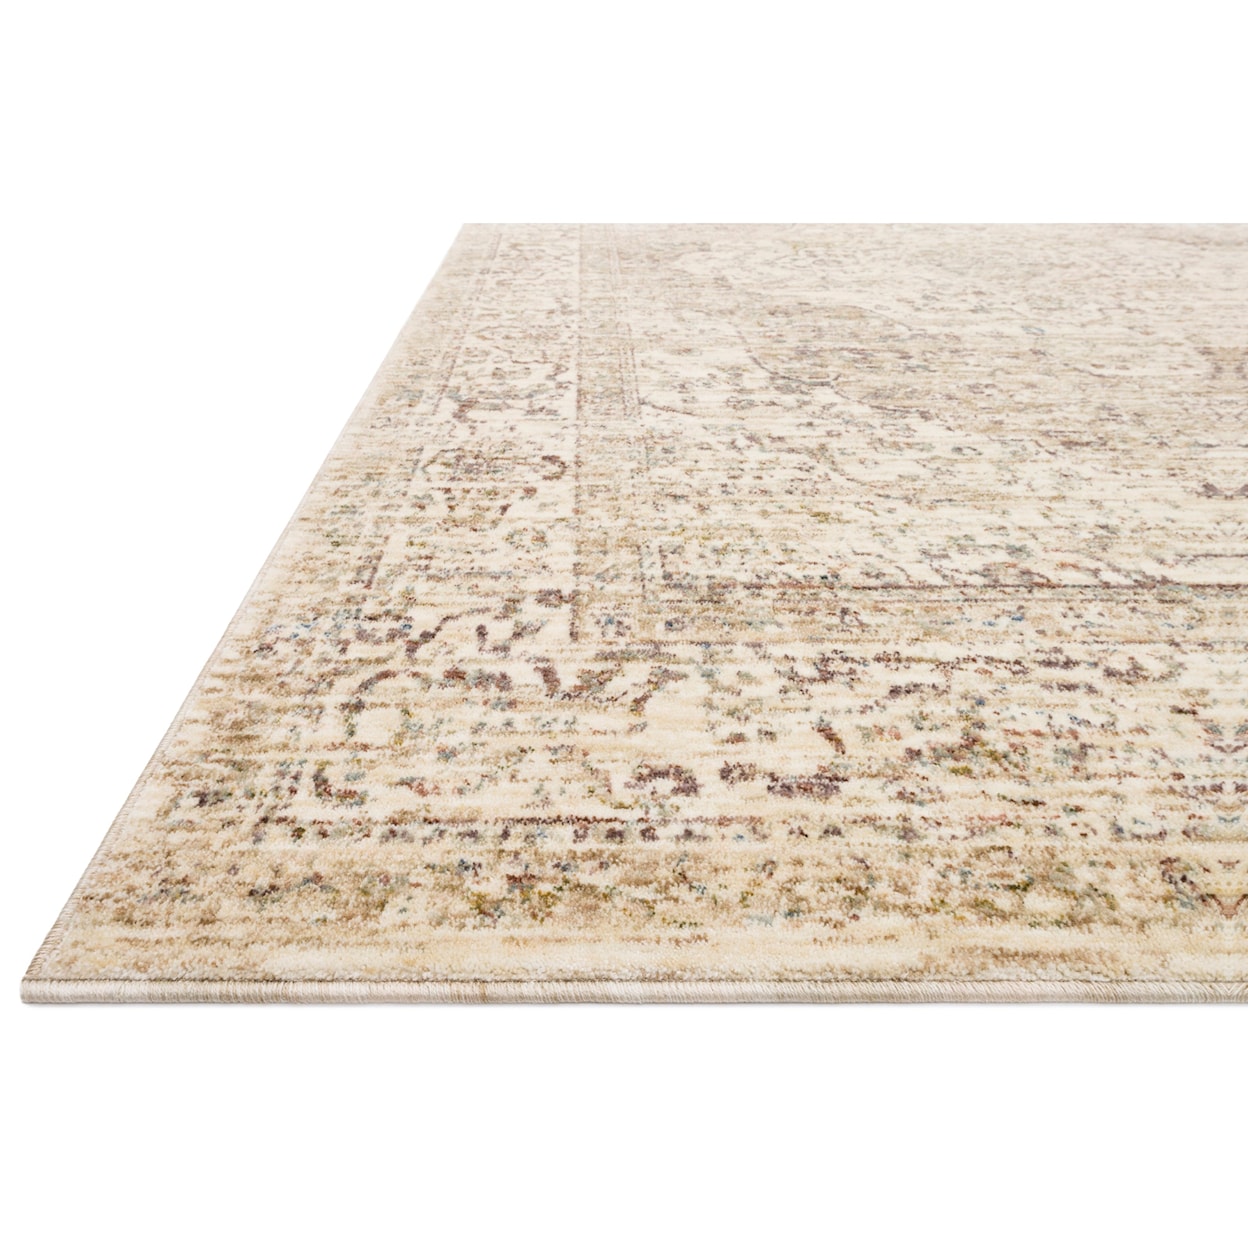 Reeds Rugs Revere 9'6" x 12'5" Ivory / Berry Rug